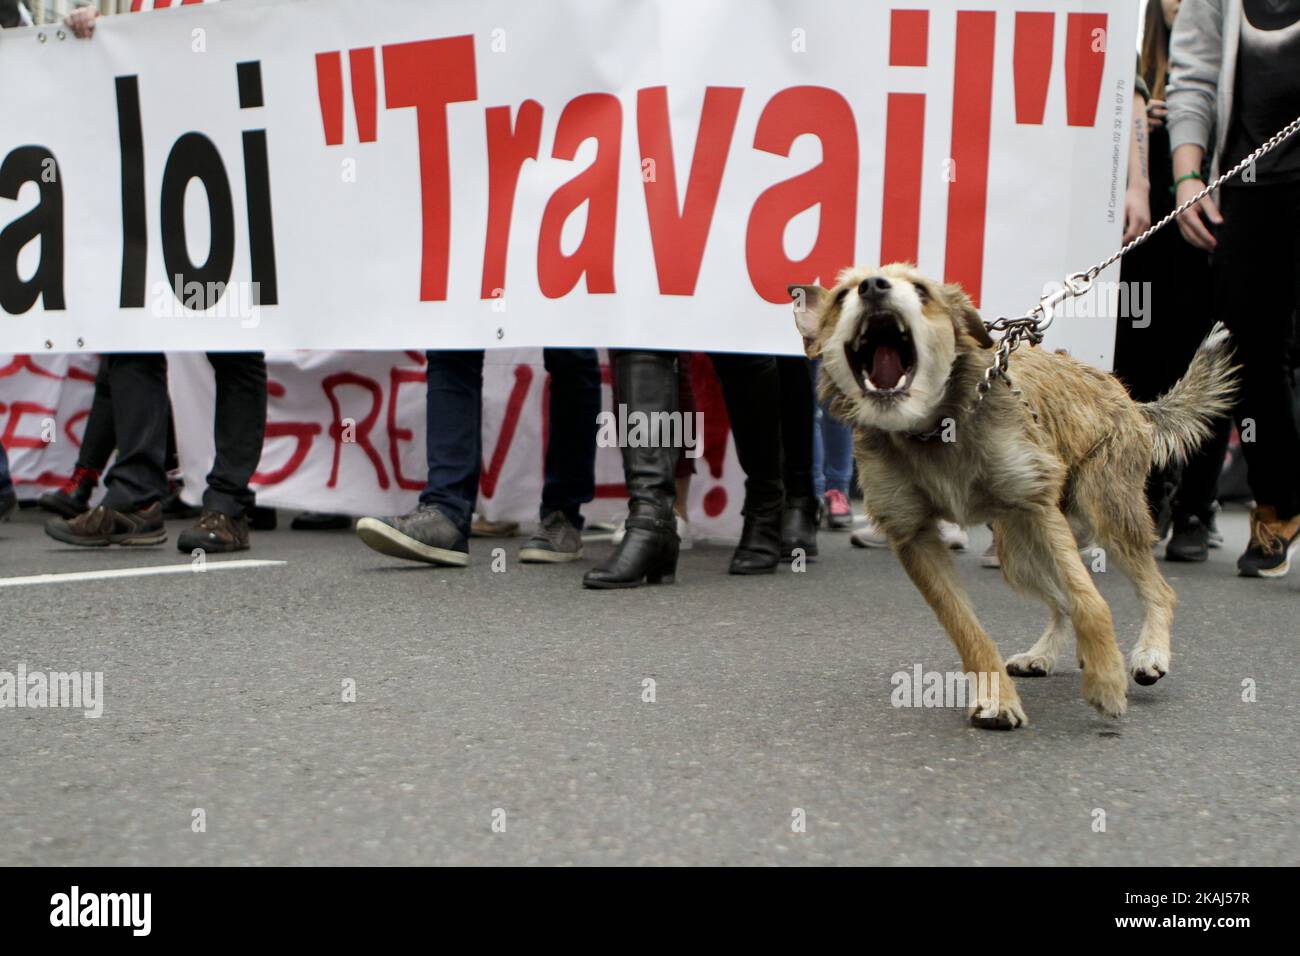 A dog barking during the people rally in Alsace, on 31 March 2016, against Bill Working Myriam El Khomri. They were about 80 protesters in the streets of Haguenau this morning and nearly 450 in Colmar before the Prefecture of Haut-Rhin in the late morning. This afternoon, 2000 people were present Place de la Bourse in Mulhouse and Strasbourg, between 5000 people, police and 9000 according to the CGT marched through the streets of downtown. (Photo by Elyxandro Cegarra/NurPhoto) *** Please Use Credit from Credit Field *** Stock Photo